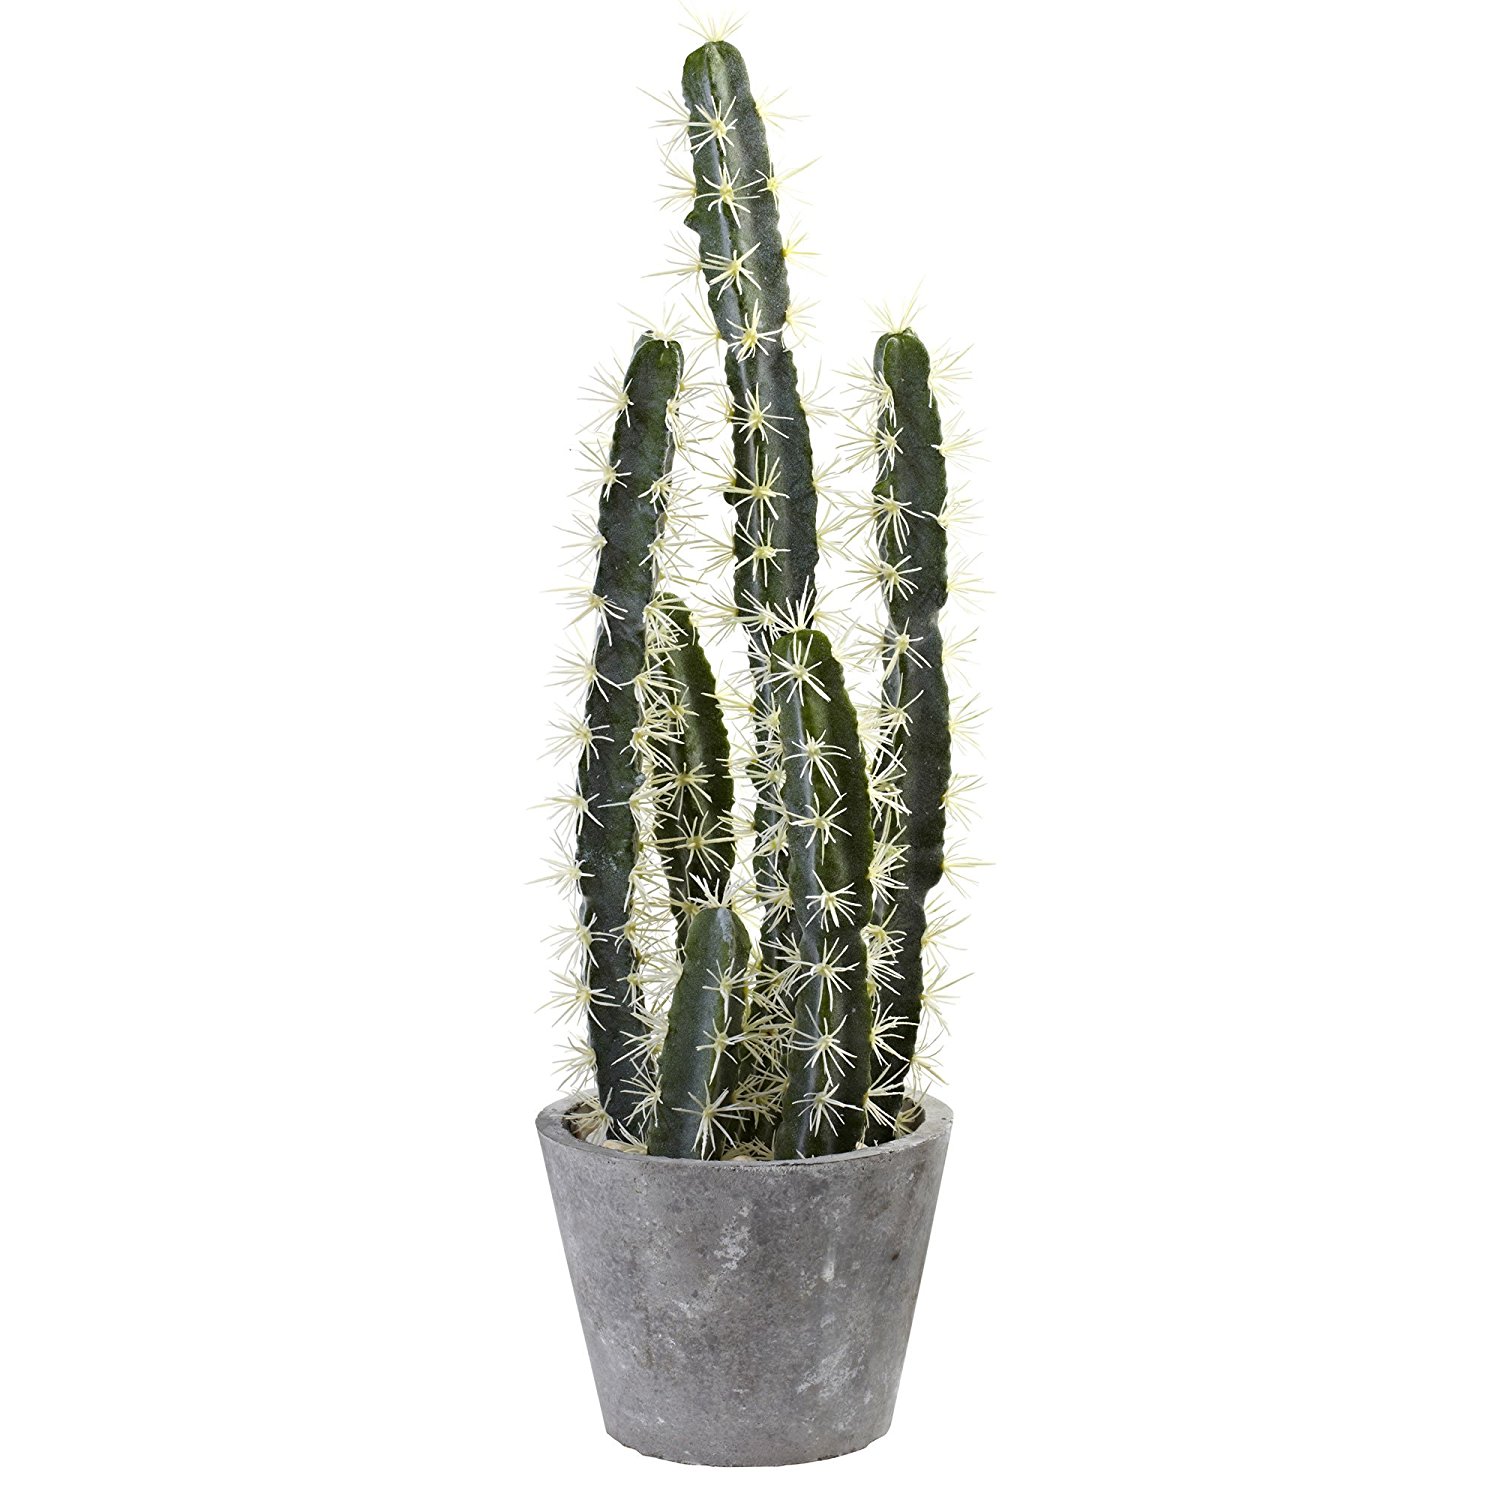 Amazon.com: Nearly Natural 4845 Decorative Cactus Garden with Cement ...